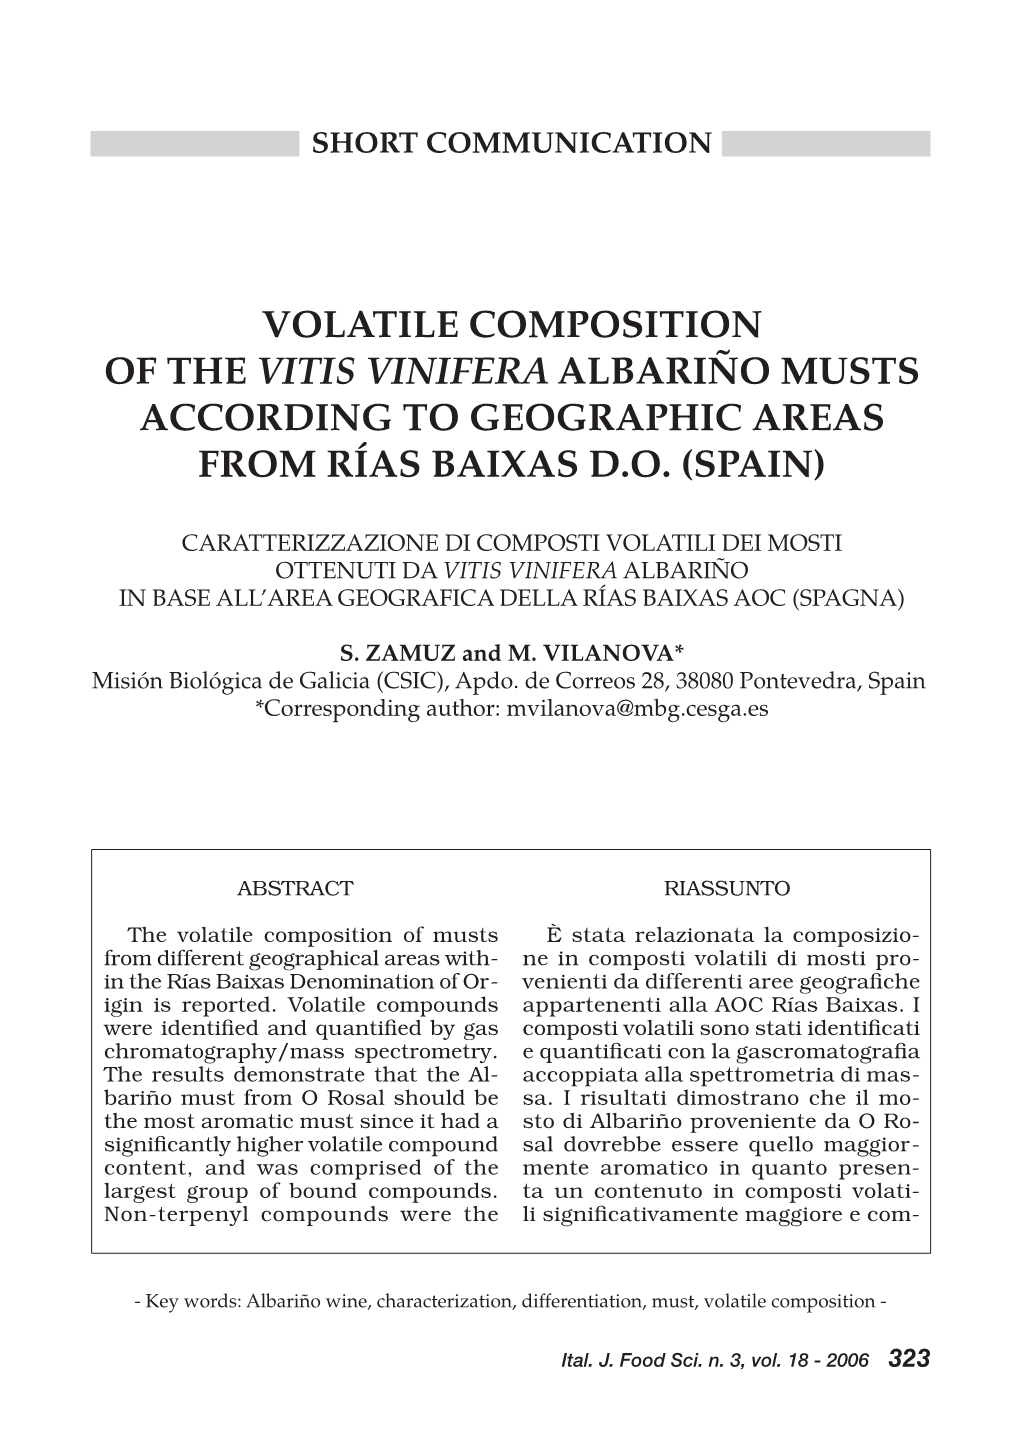 Volatile Composition of the Vitis Vinifera Albariño Musts According to Geographic Areas from Rías Baixas D.O